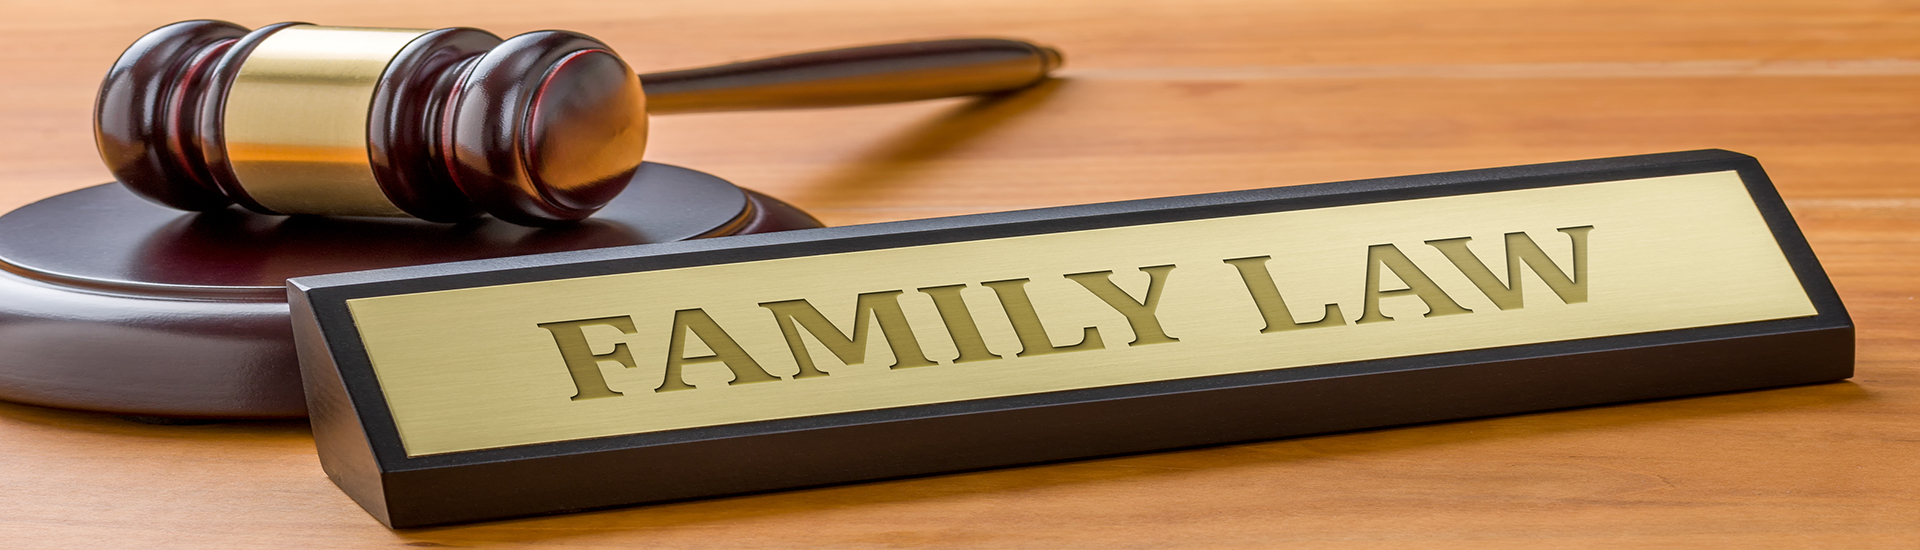 A-gavel-and-a-name-plate-with-the-engraving-Family-law